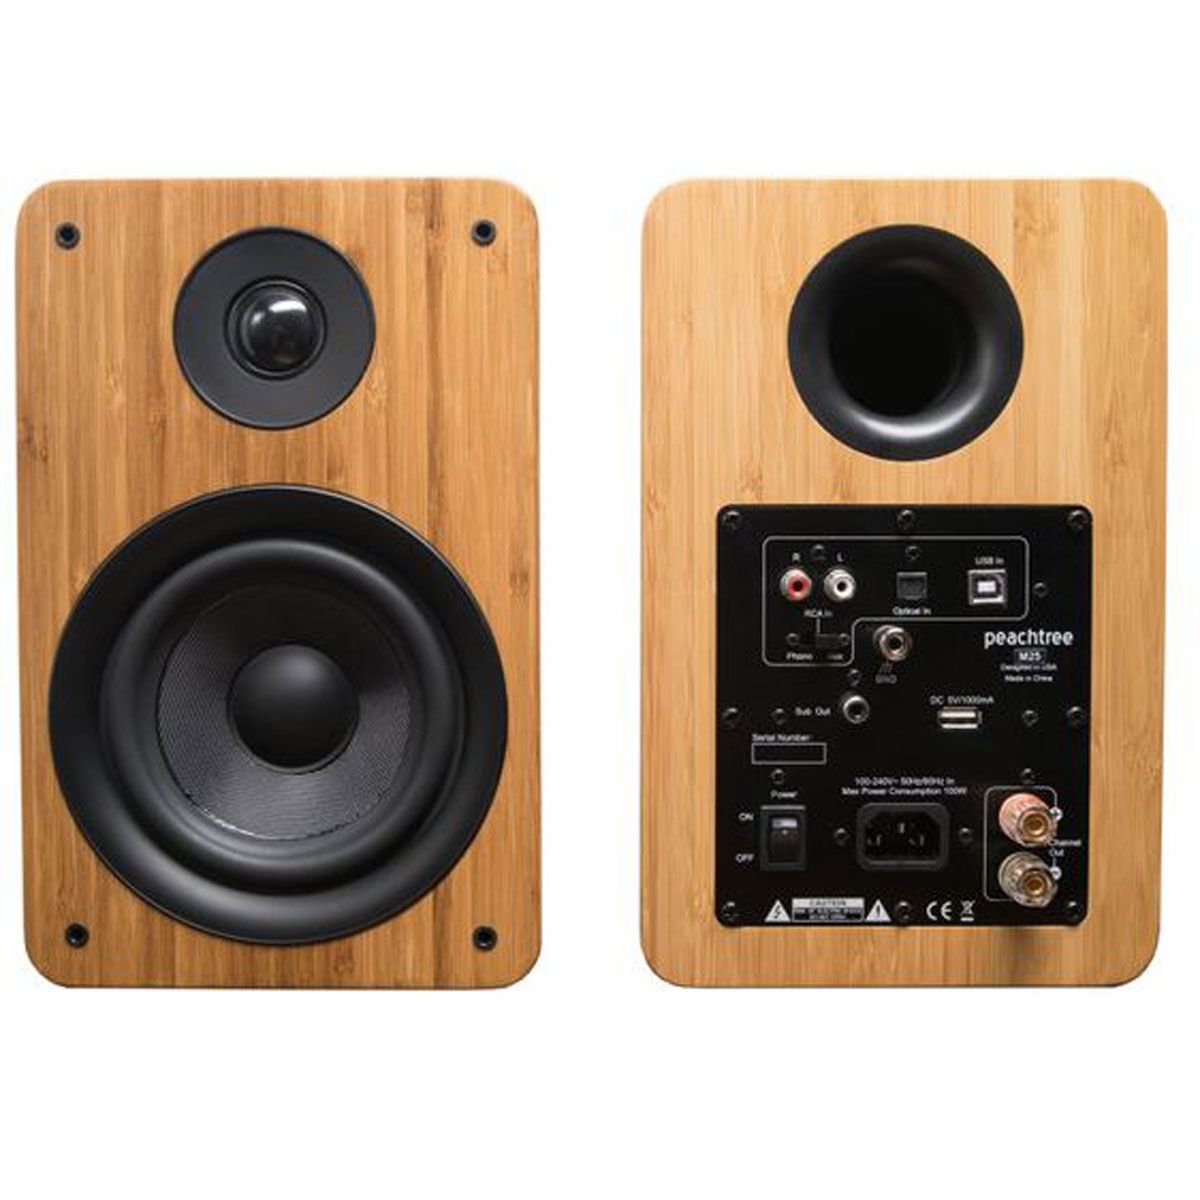 Peachtree M24 Powered Speakers, Bamboo, front and back view